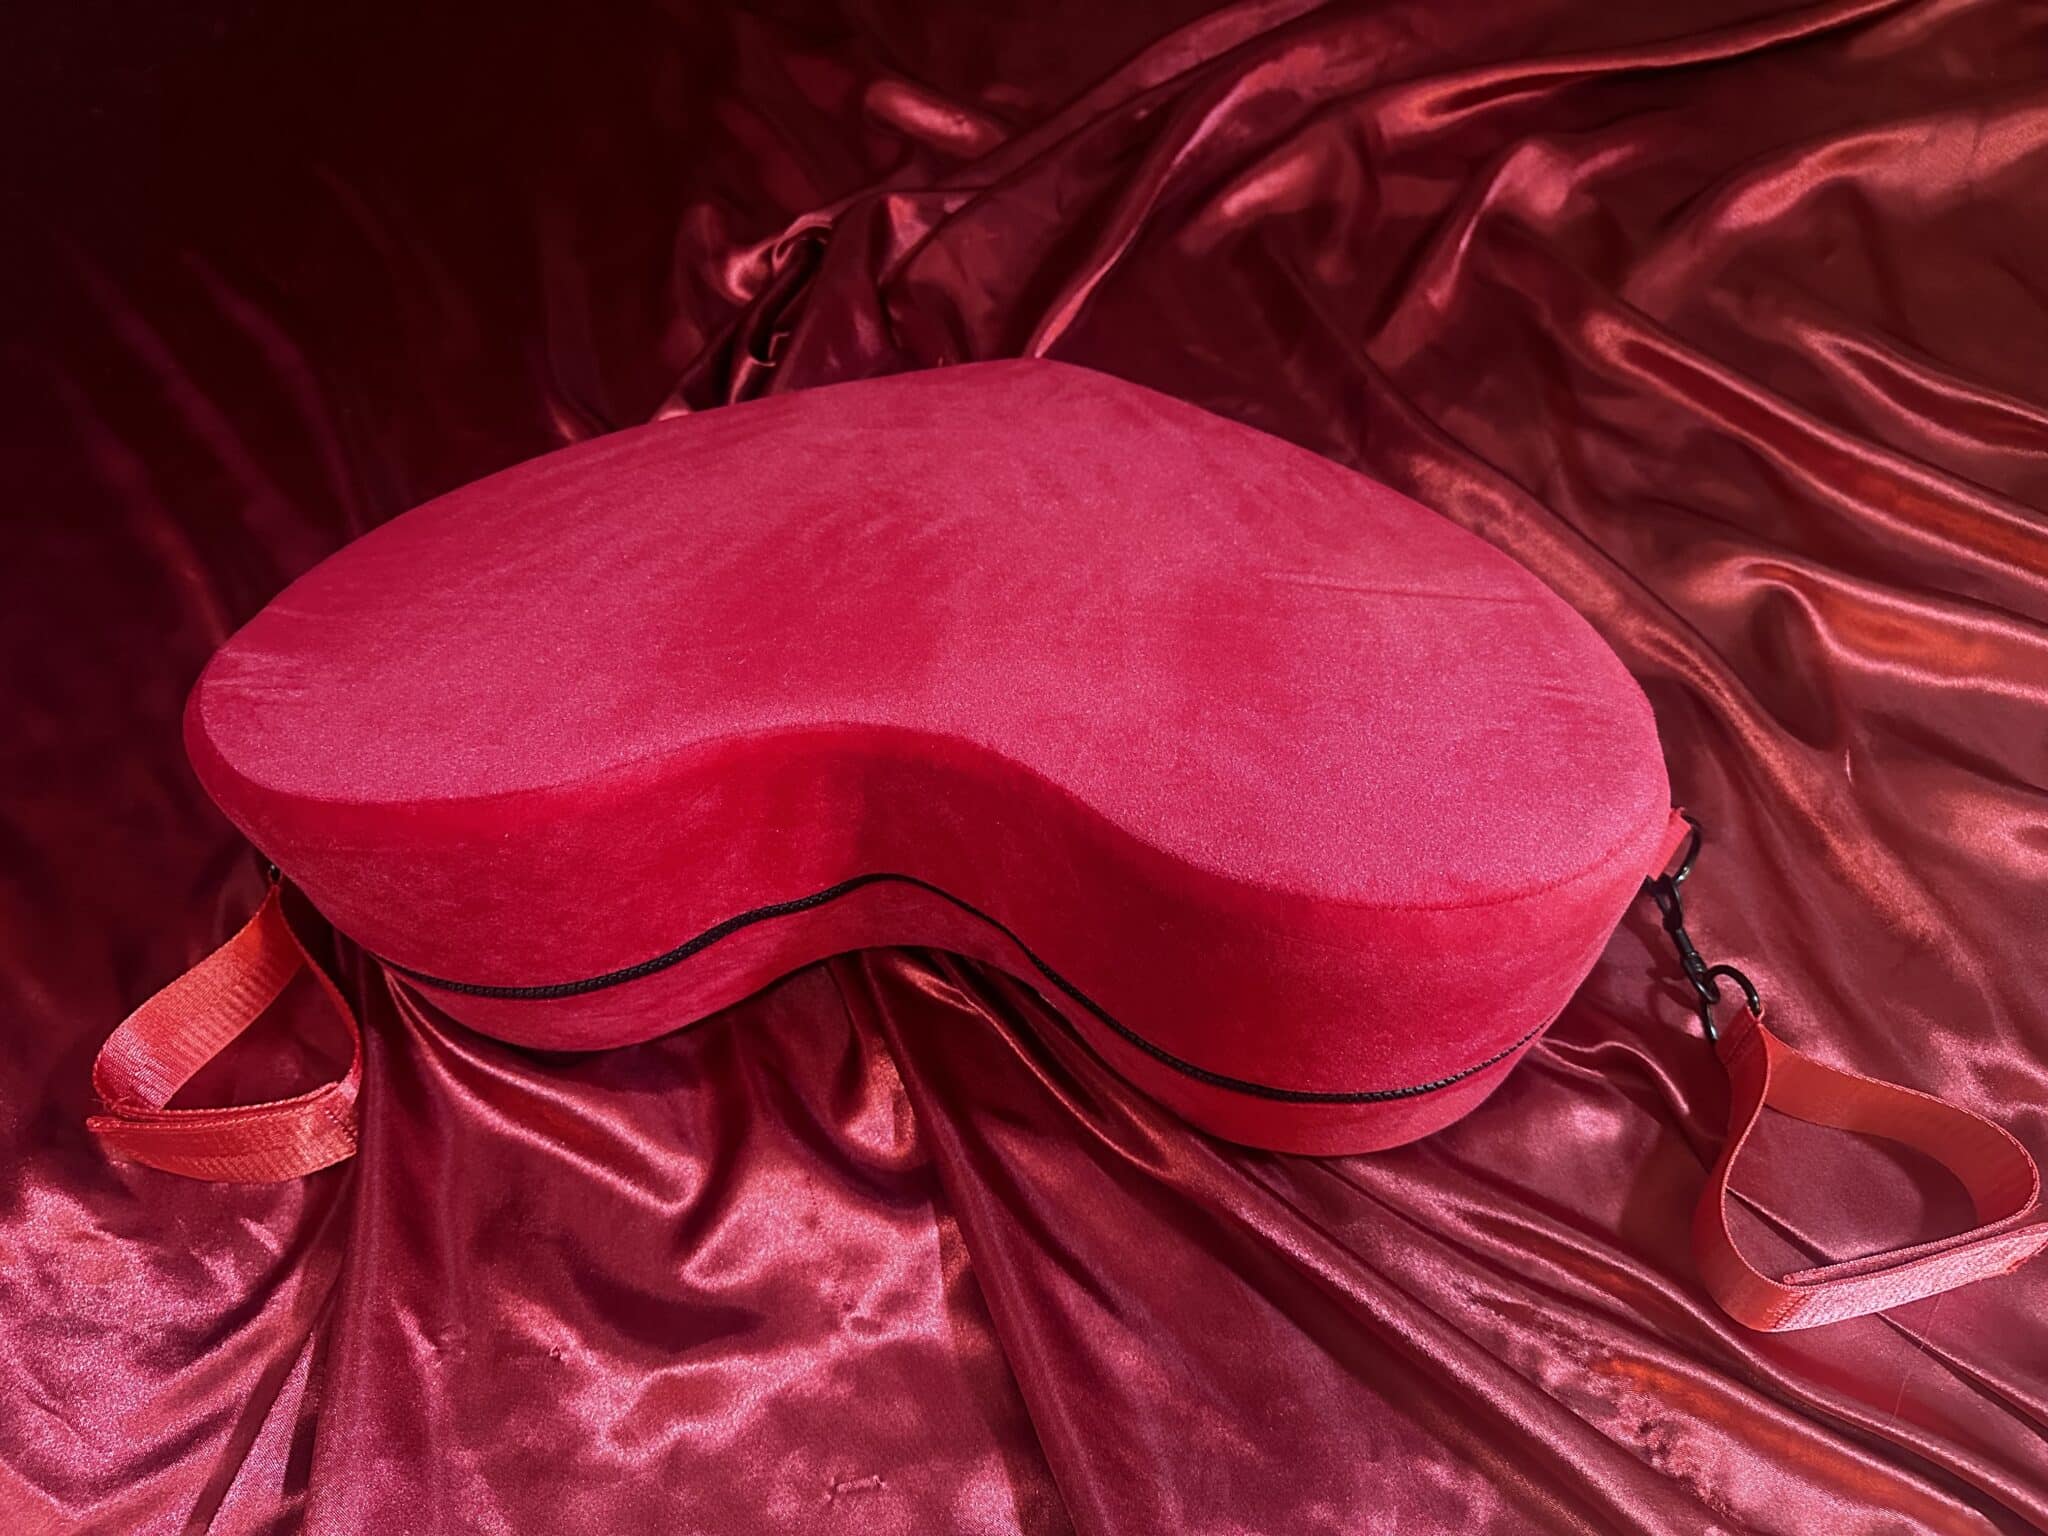 Whipsmart Love Cushion with Restraints How Well-made is it?